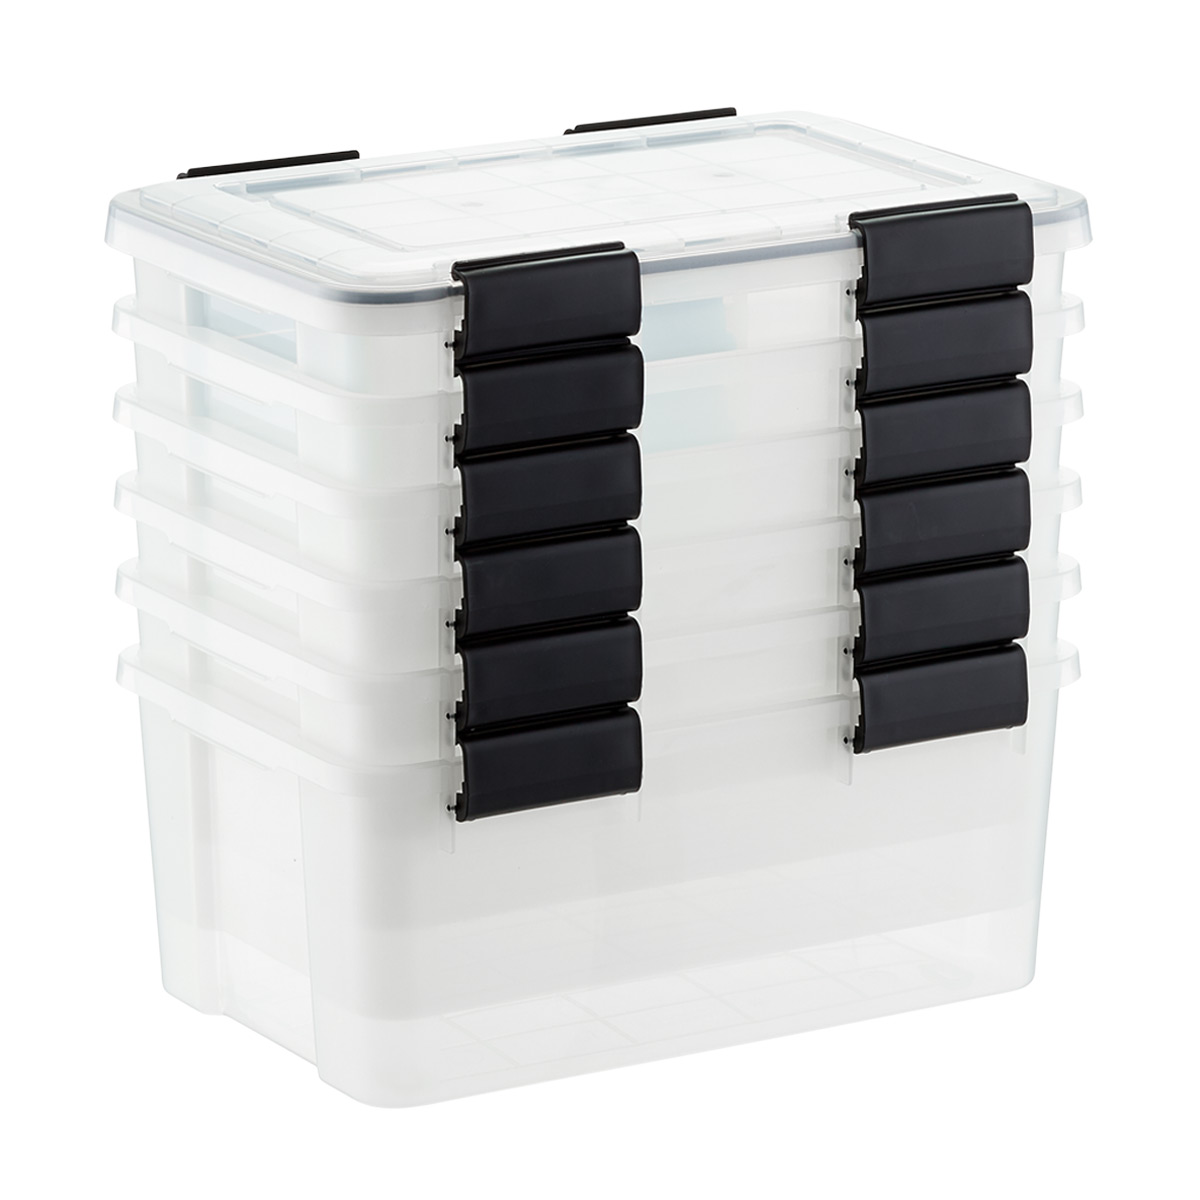 https://www.containerstore.com/catalogimages/356470/10065384-weathertight-tote-19qt-case.jpg